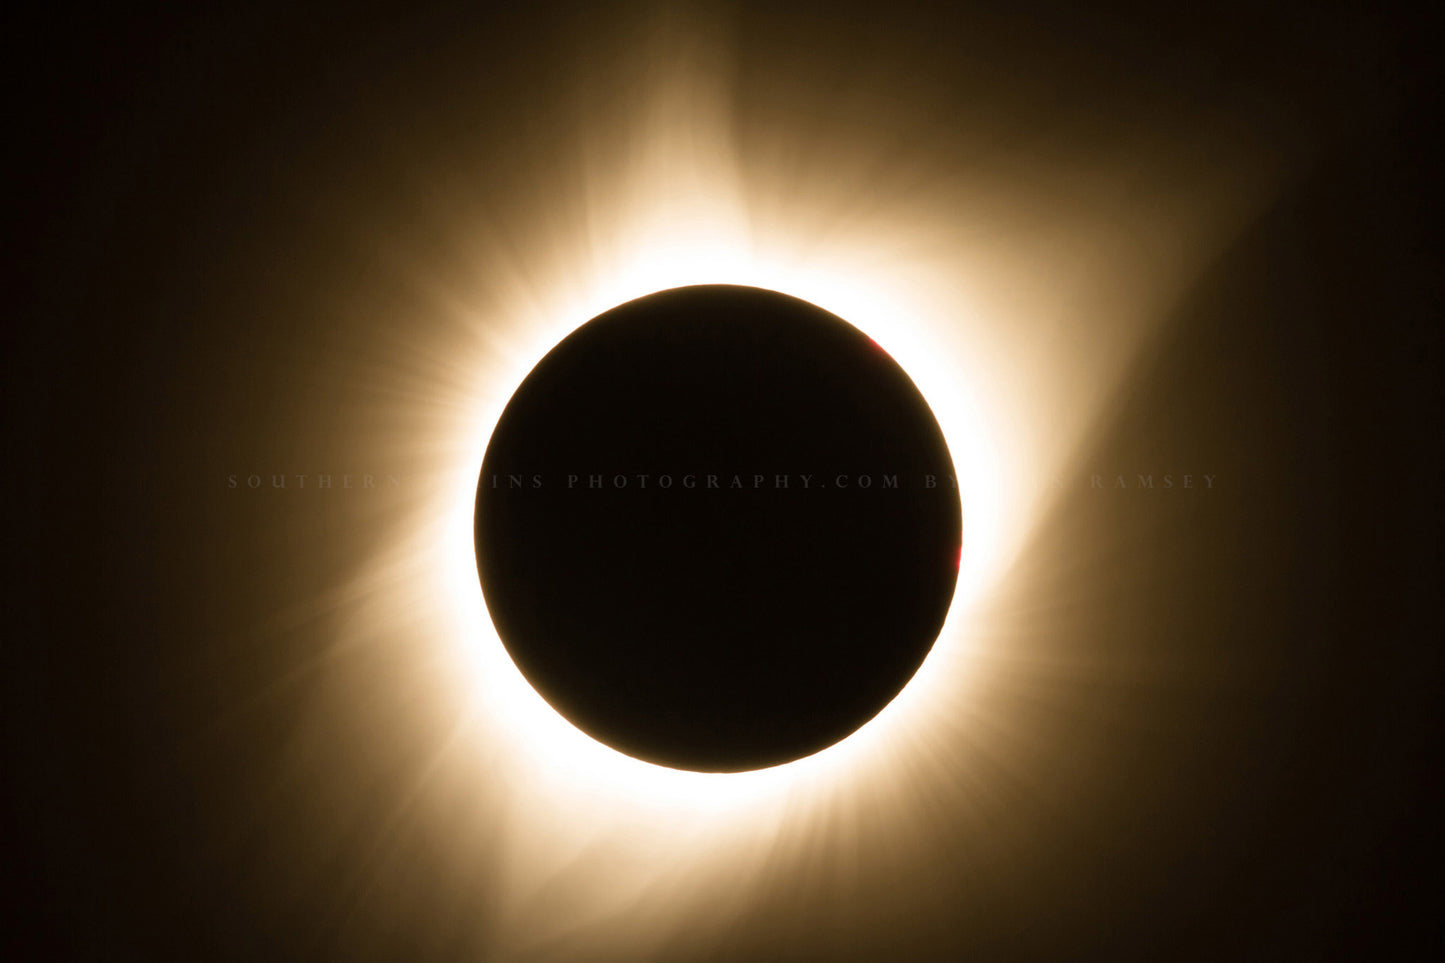 Celestial photography print of a total solar eclipse with bright gold corona taking place on a summer day in Nebraska by Sean Ramsey of Southern Plains Photography.